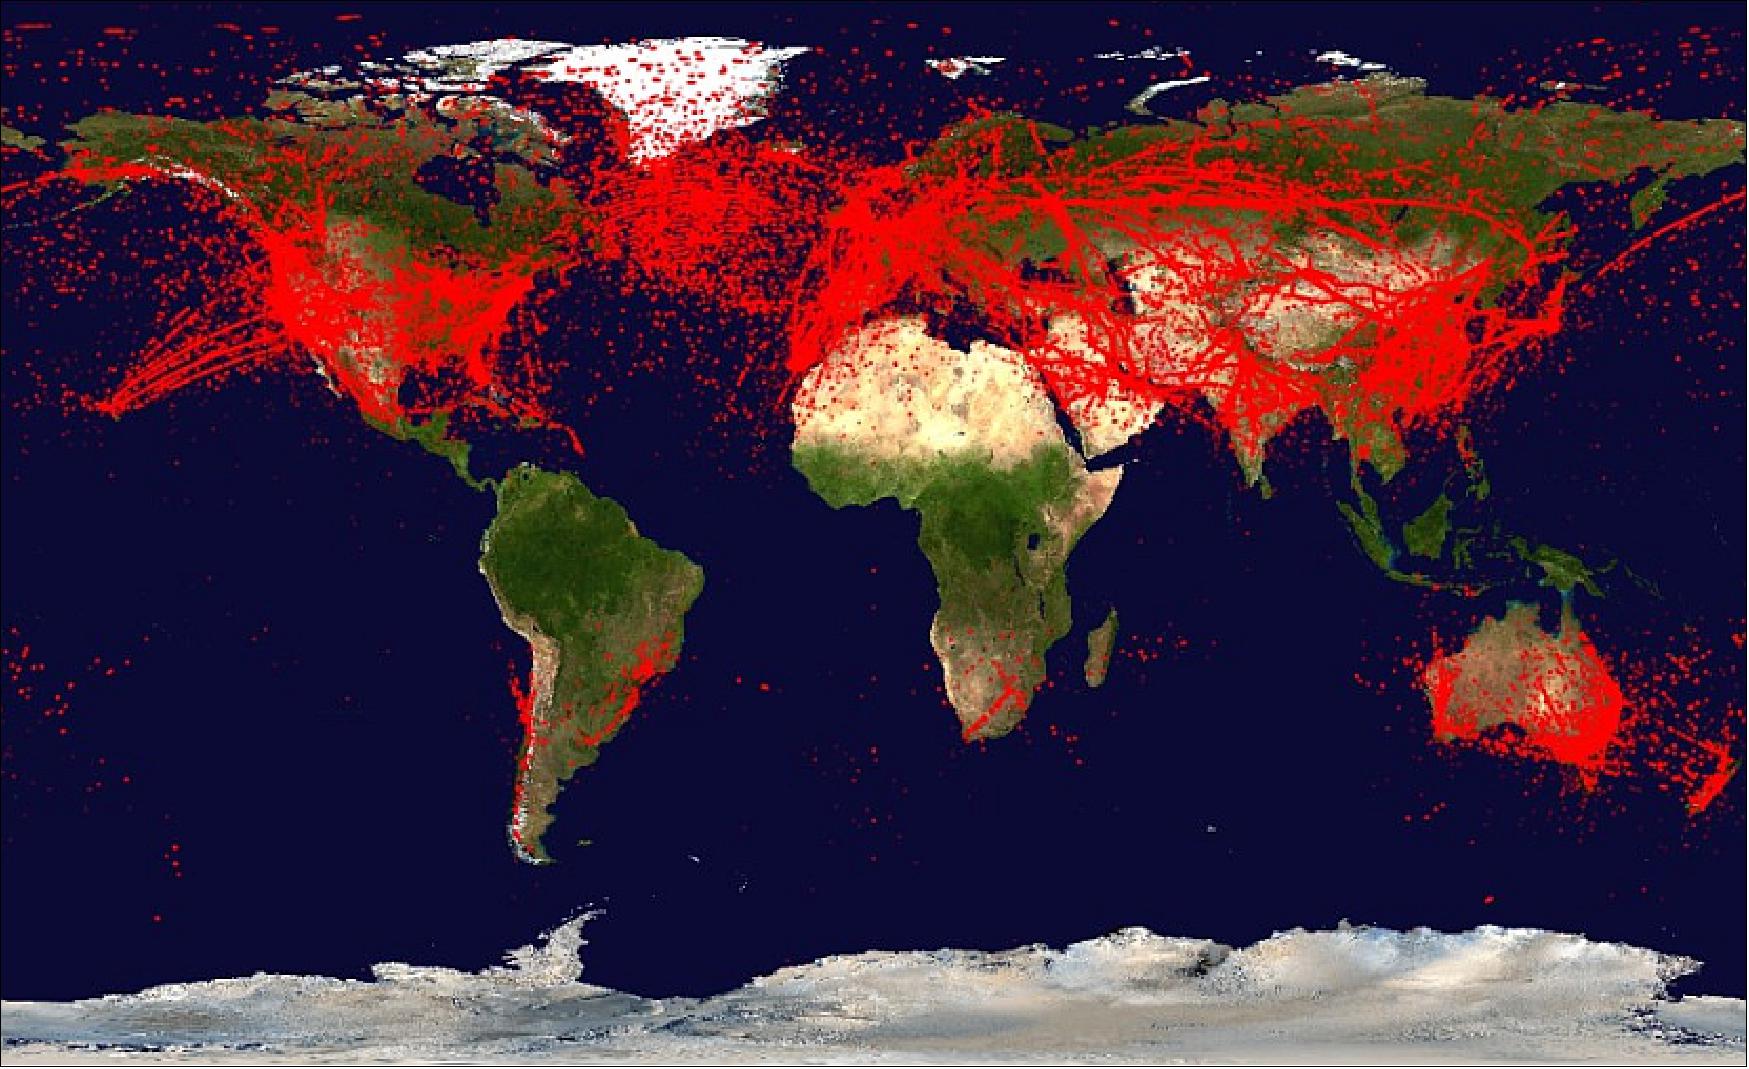 Figure 15: Global scale map of all of the ADS-B position messages received by CanX-7 from October 2016 to January 2017 (image credit: UTIAS/SFL)